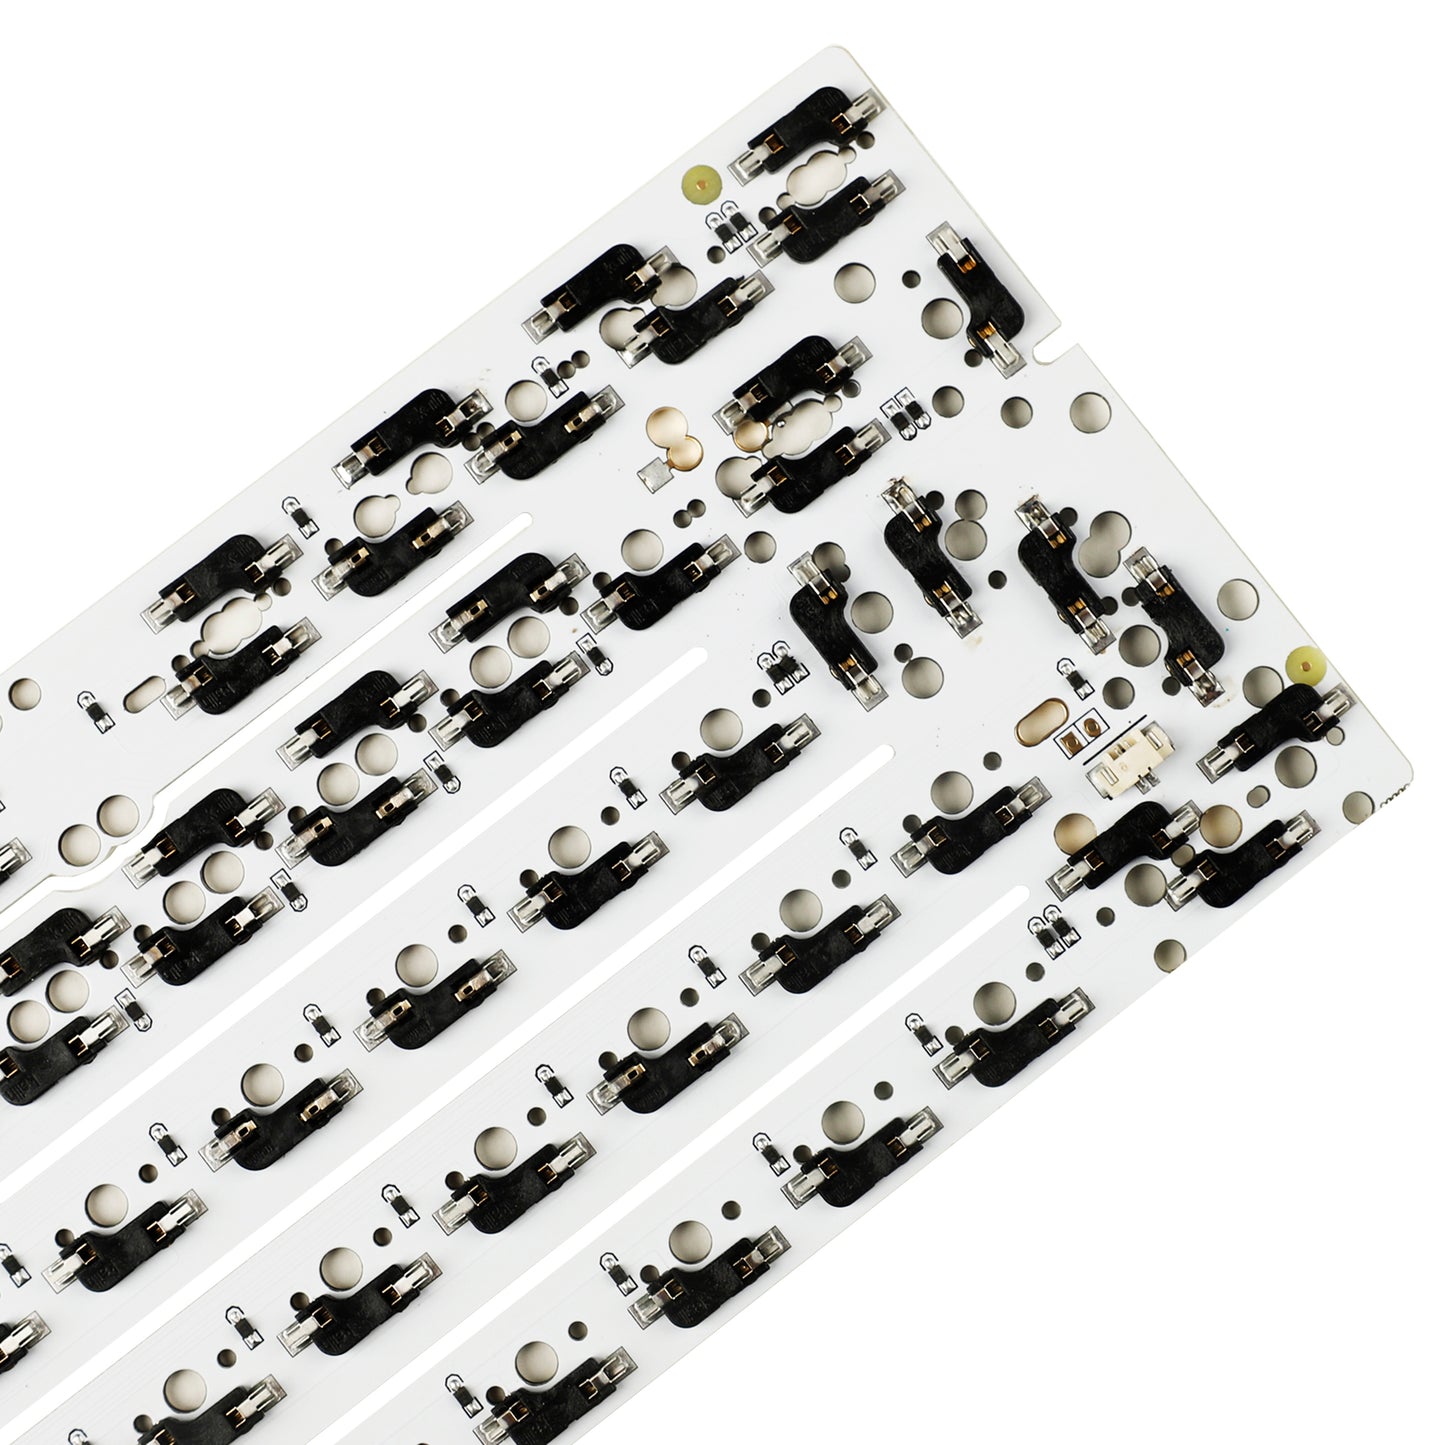 YMDK DK61 64 GH60 Wired Hot-swappable 60 PCB（ Support ISO ANSI Fully Programmable VIA VIAL）